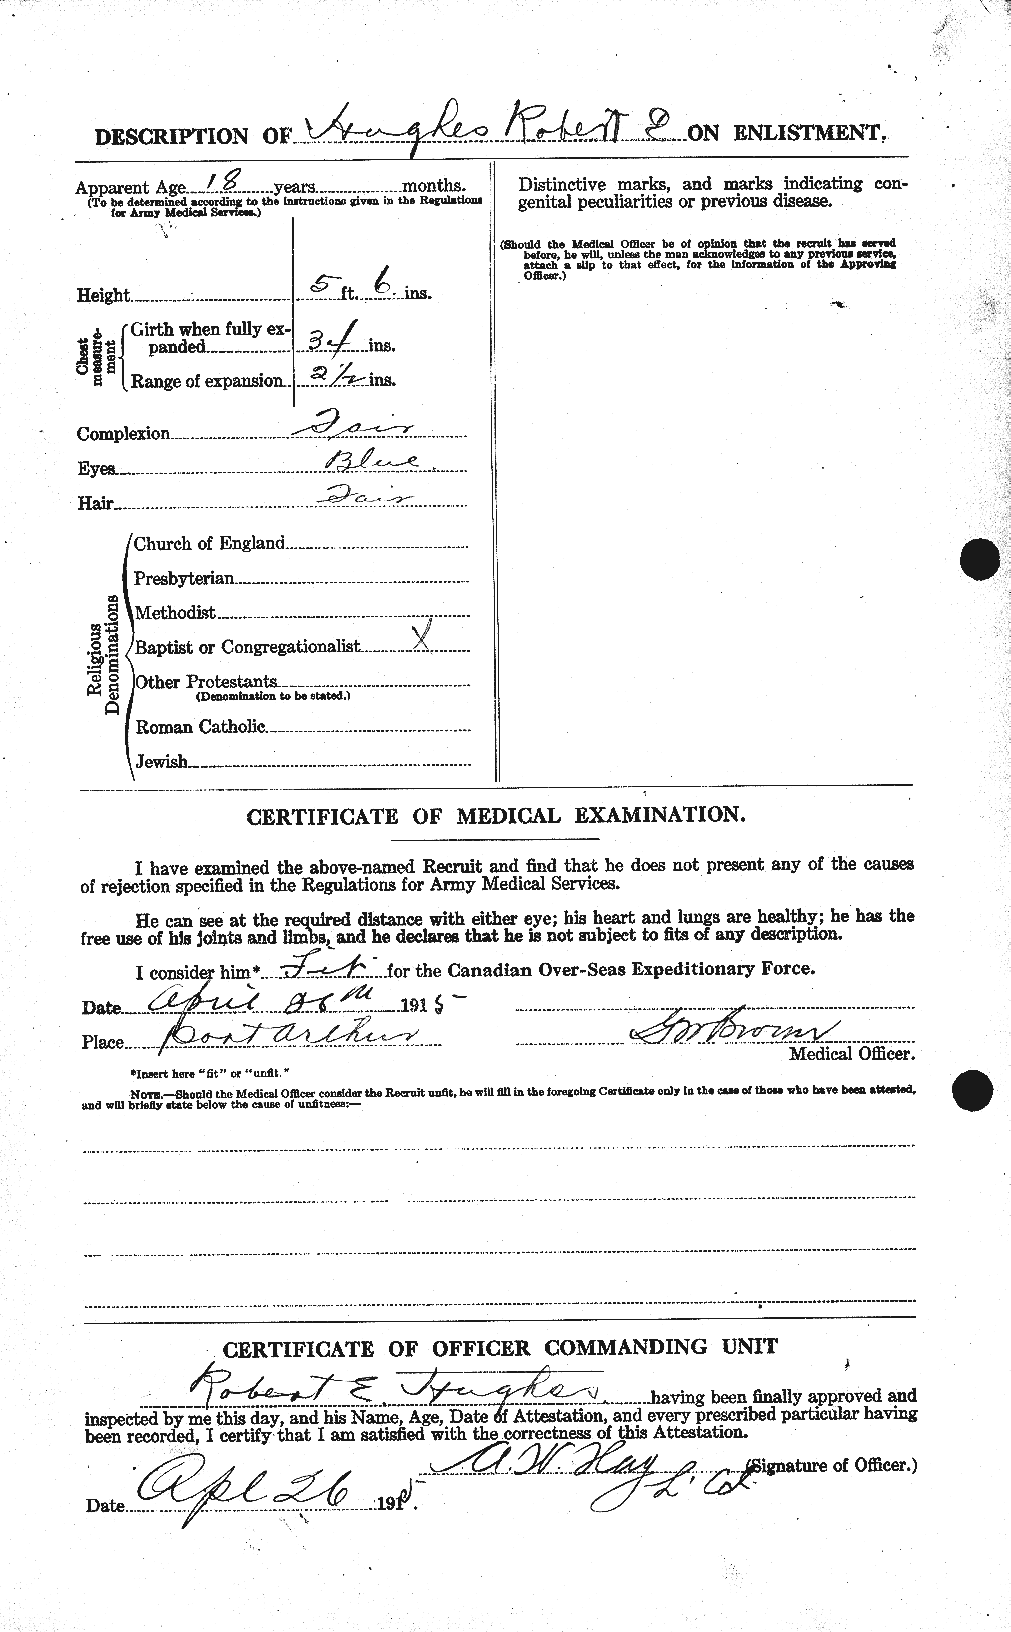 Personnel Records of the First World War - CEF 406609b